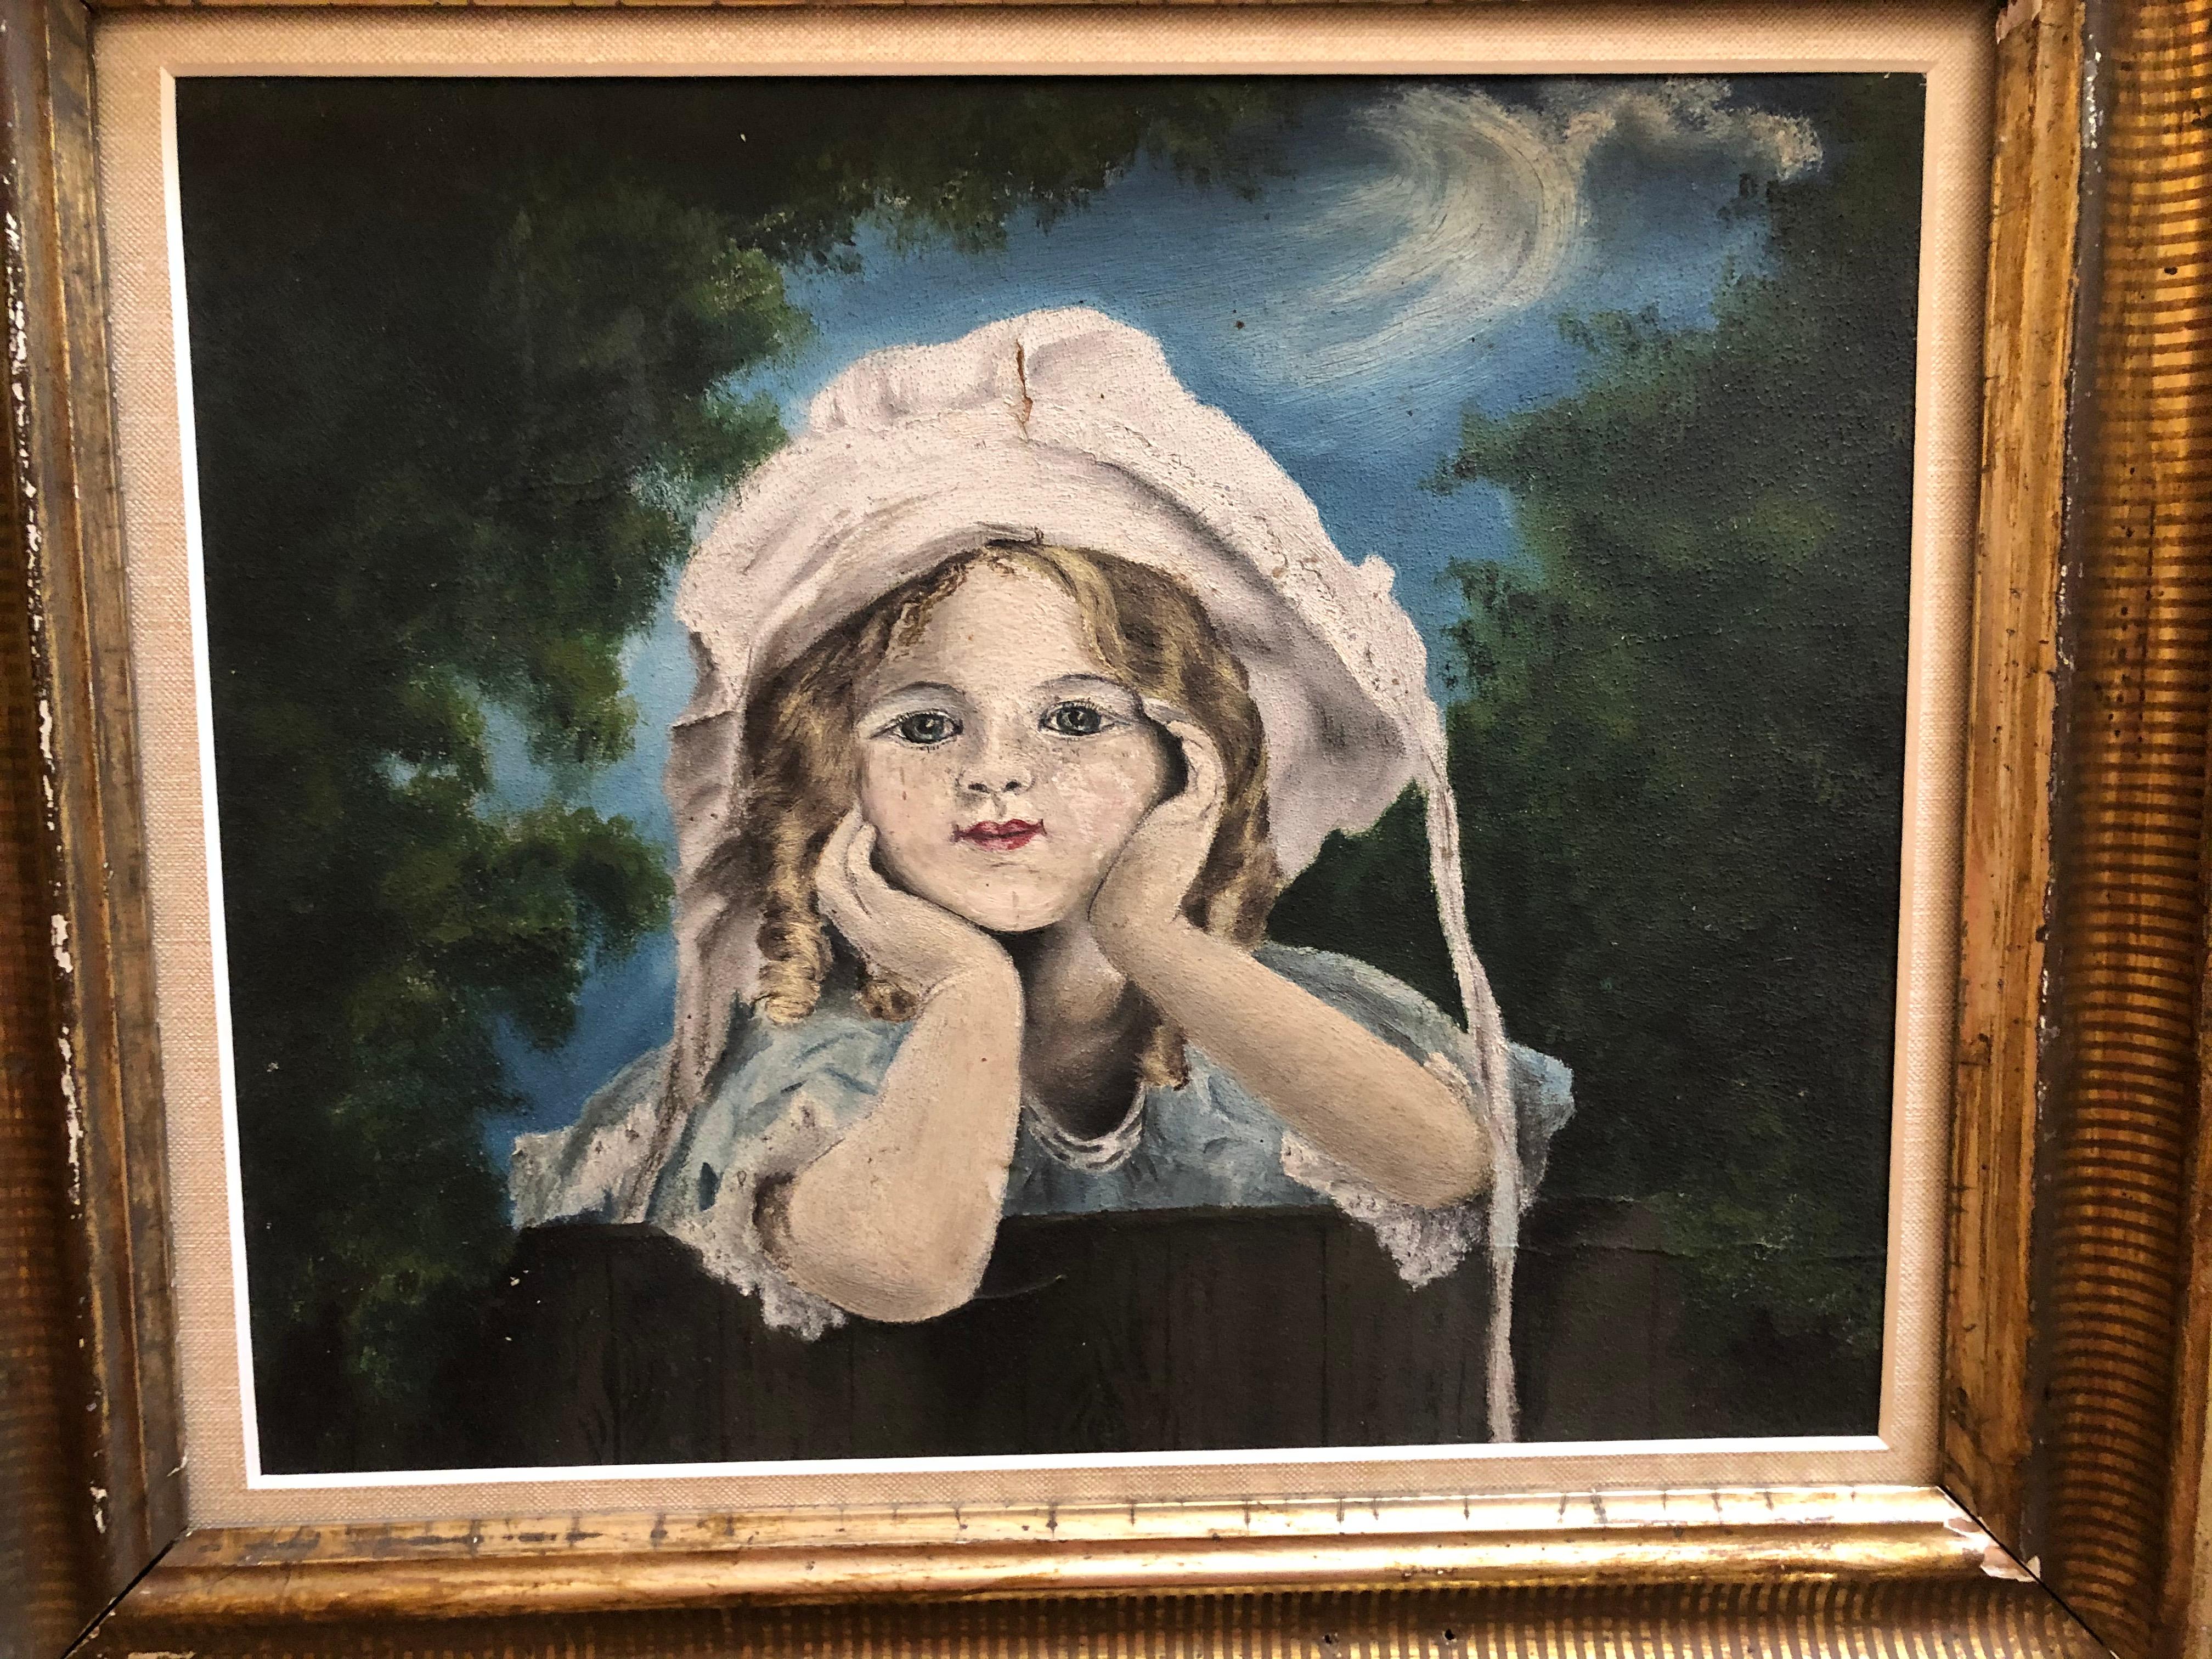 Unknown Figurative Painting - 19th Century American School Oil on Board